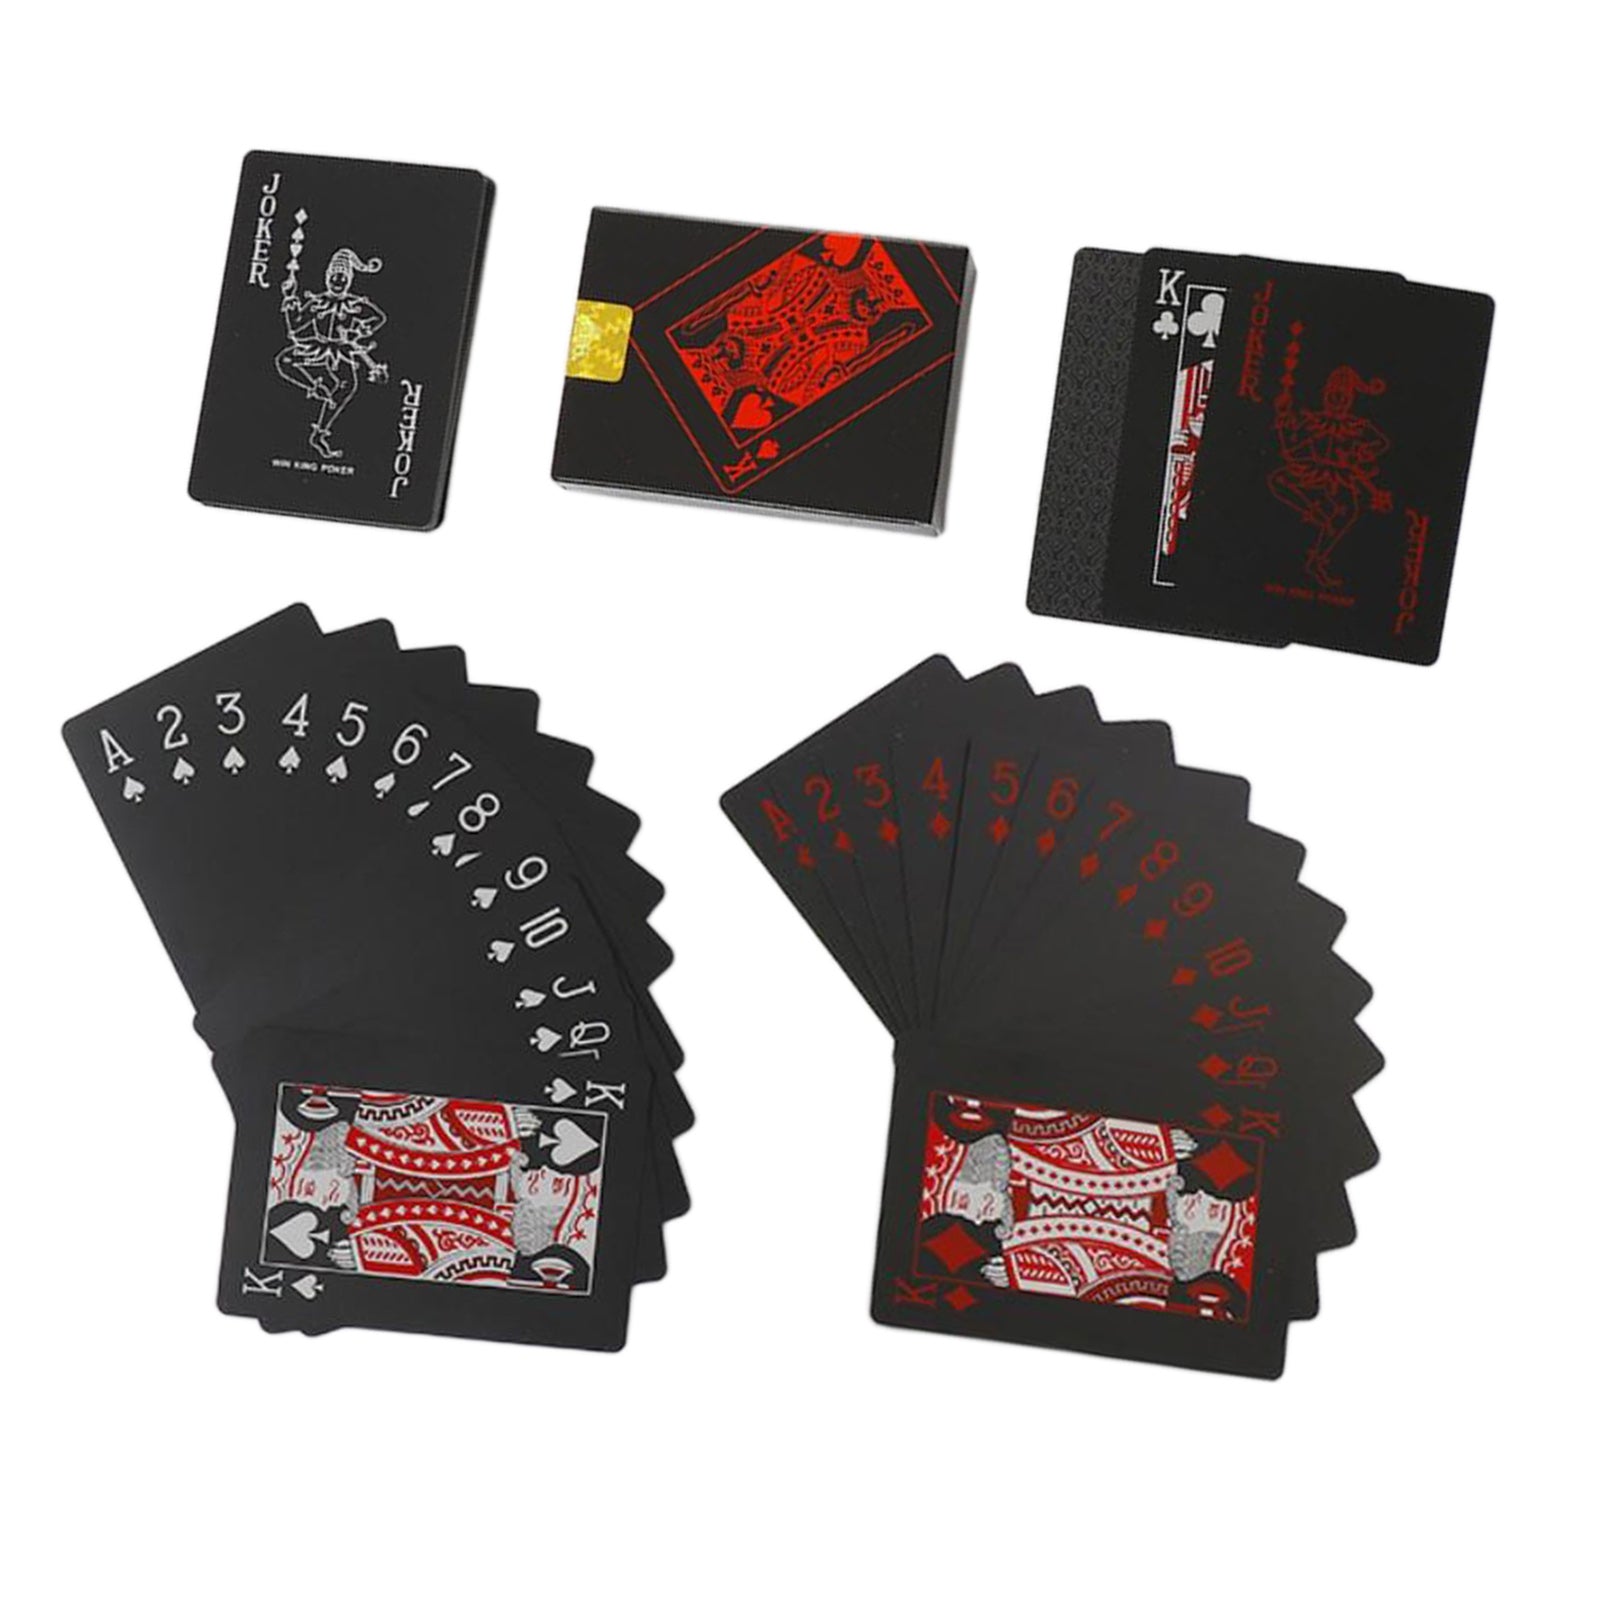 Waterproof PVC Playing Cards Black Poker Party Magic Game Fun Red Silver